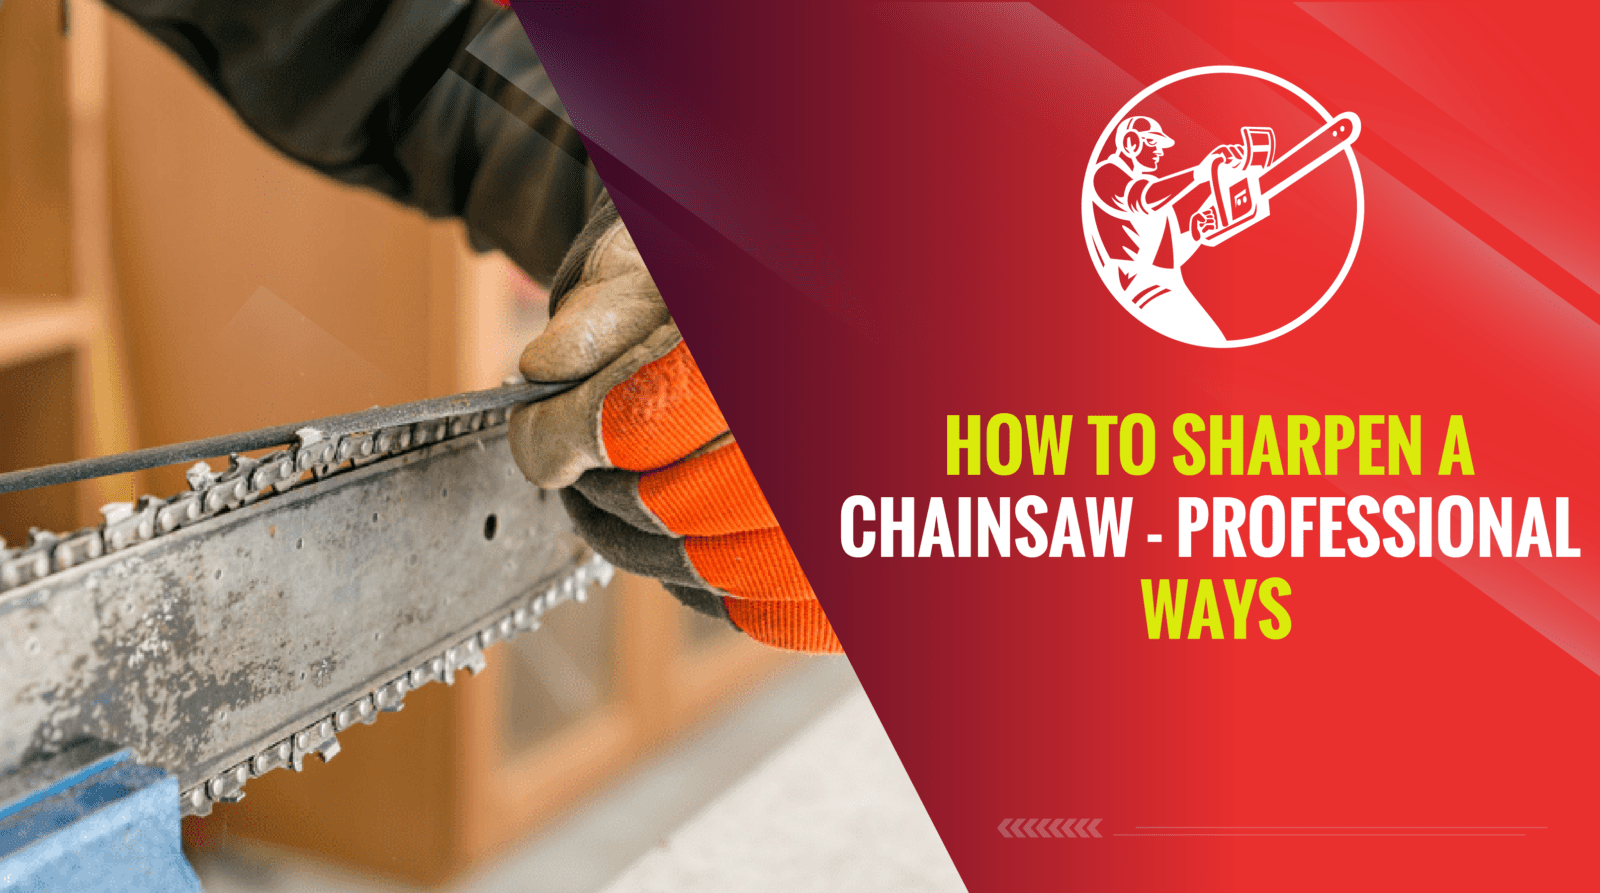 How To Sharpen A Chainsaw - Professional Ways